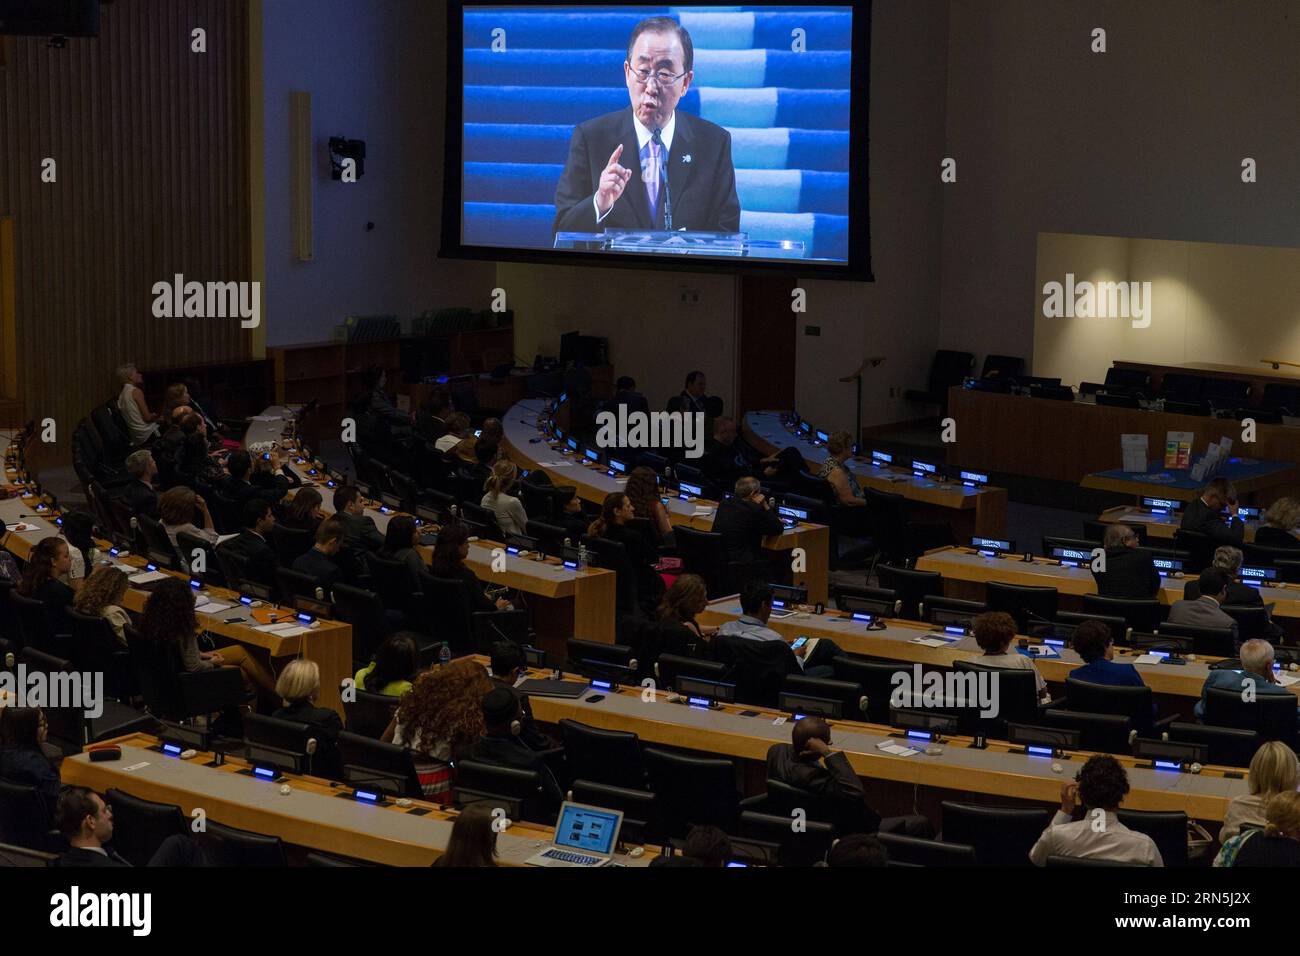 Photo taken on June 26, 2015, shows people watch live stream of UN Secretary General Ban Ki-moon speaks in San Francisco during a special event is held to mark the 70th anniversary of the signing of the United Nations Charter at the United Nations headquarters in New York, United States. UN Secretary-General Ban Ki-moon was in San Francisco on Friday for an event to commemorate the 70th anniversary of the signing of the Charter of the United Nations, displaying once again the international community s renewed commitment to the cornerstone document which has guided international relations over Stock Photo